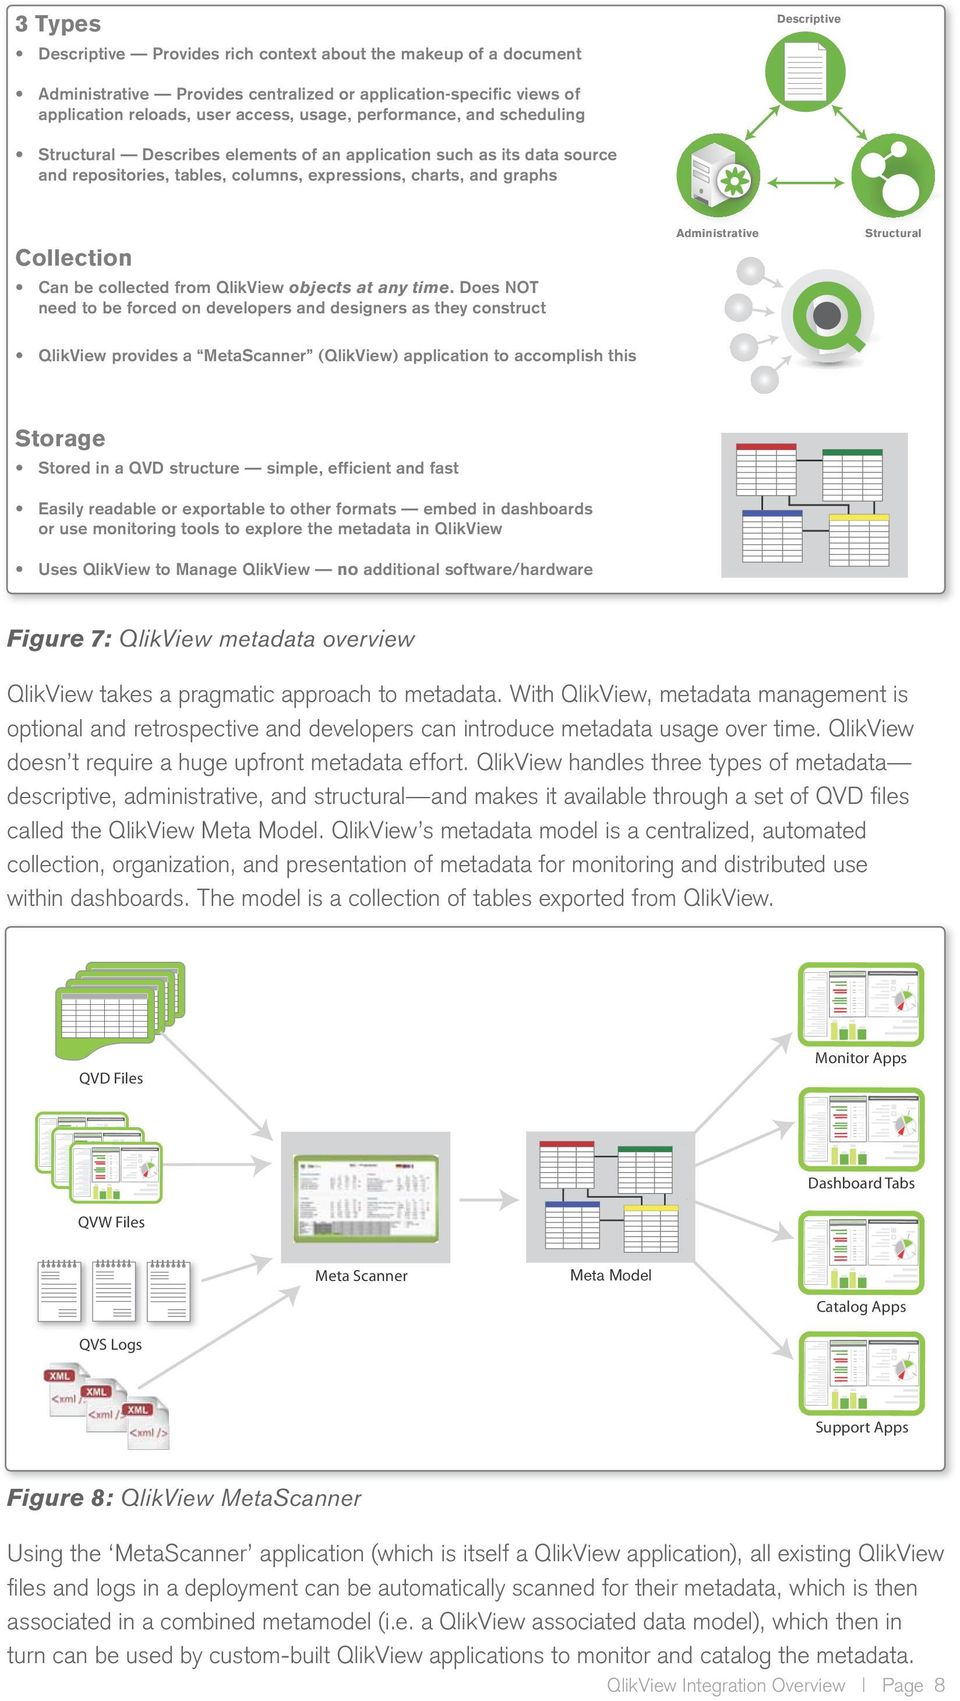 QlikView handles three types of metadata descriptive, administrative, and structural and makes it available through a set of QVD files called the QlikView Meta Model.